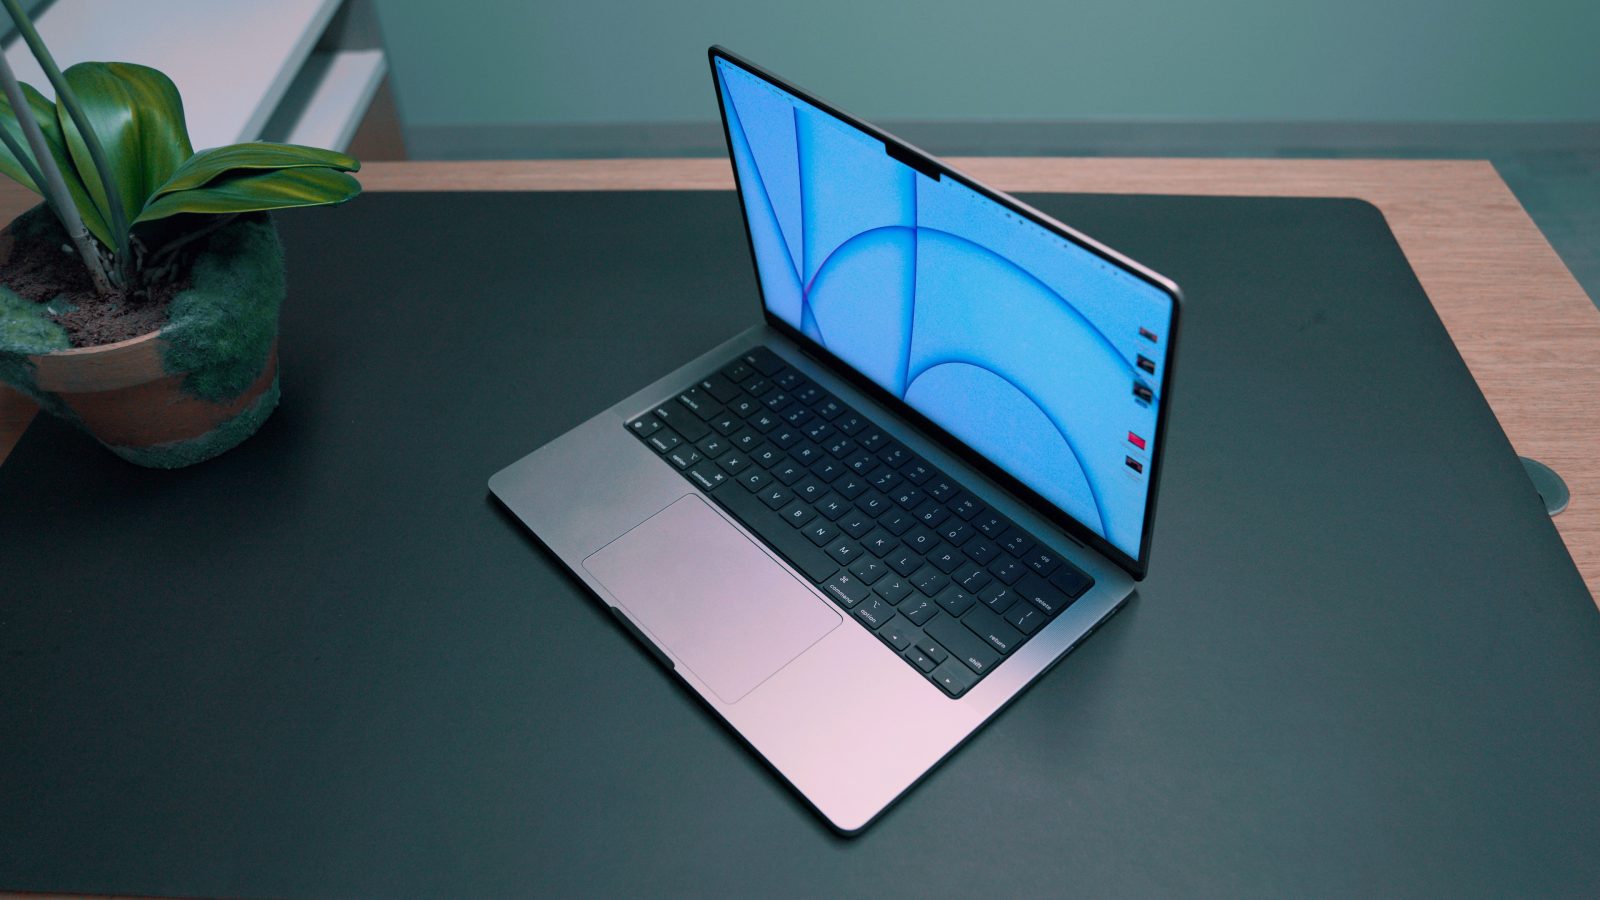 Here’s a non-pro look at how the new 14″ MacBook Pro stacks up